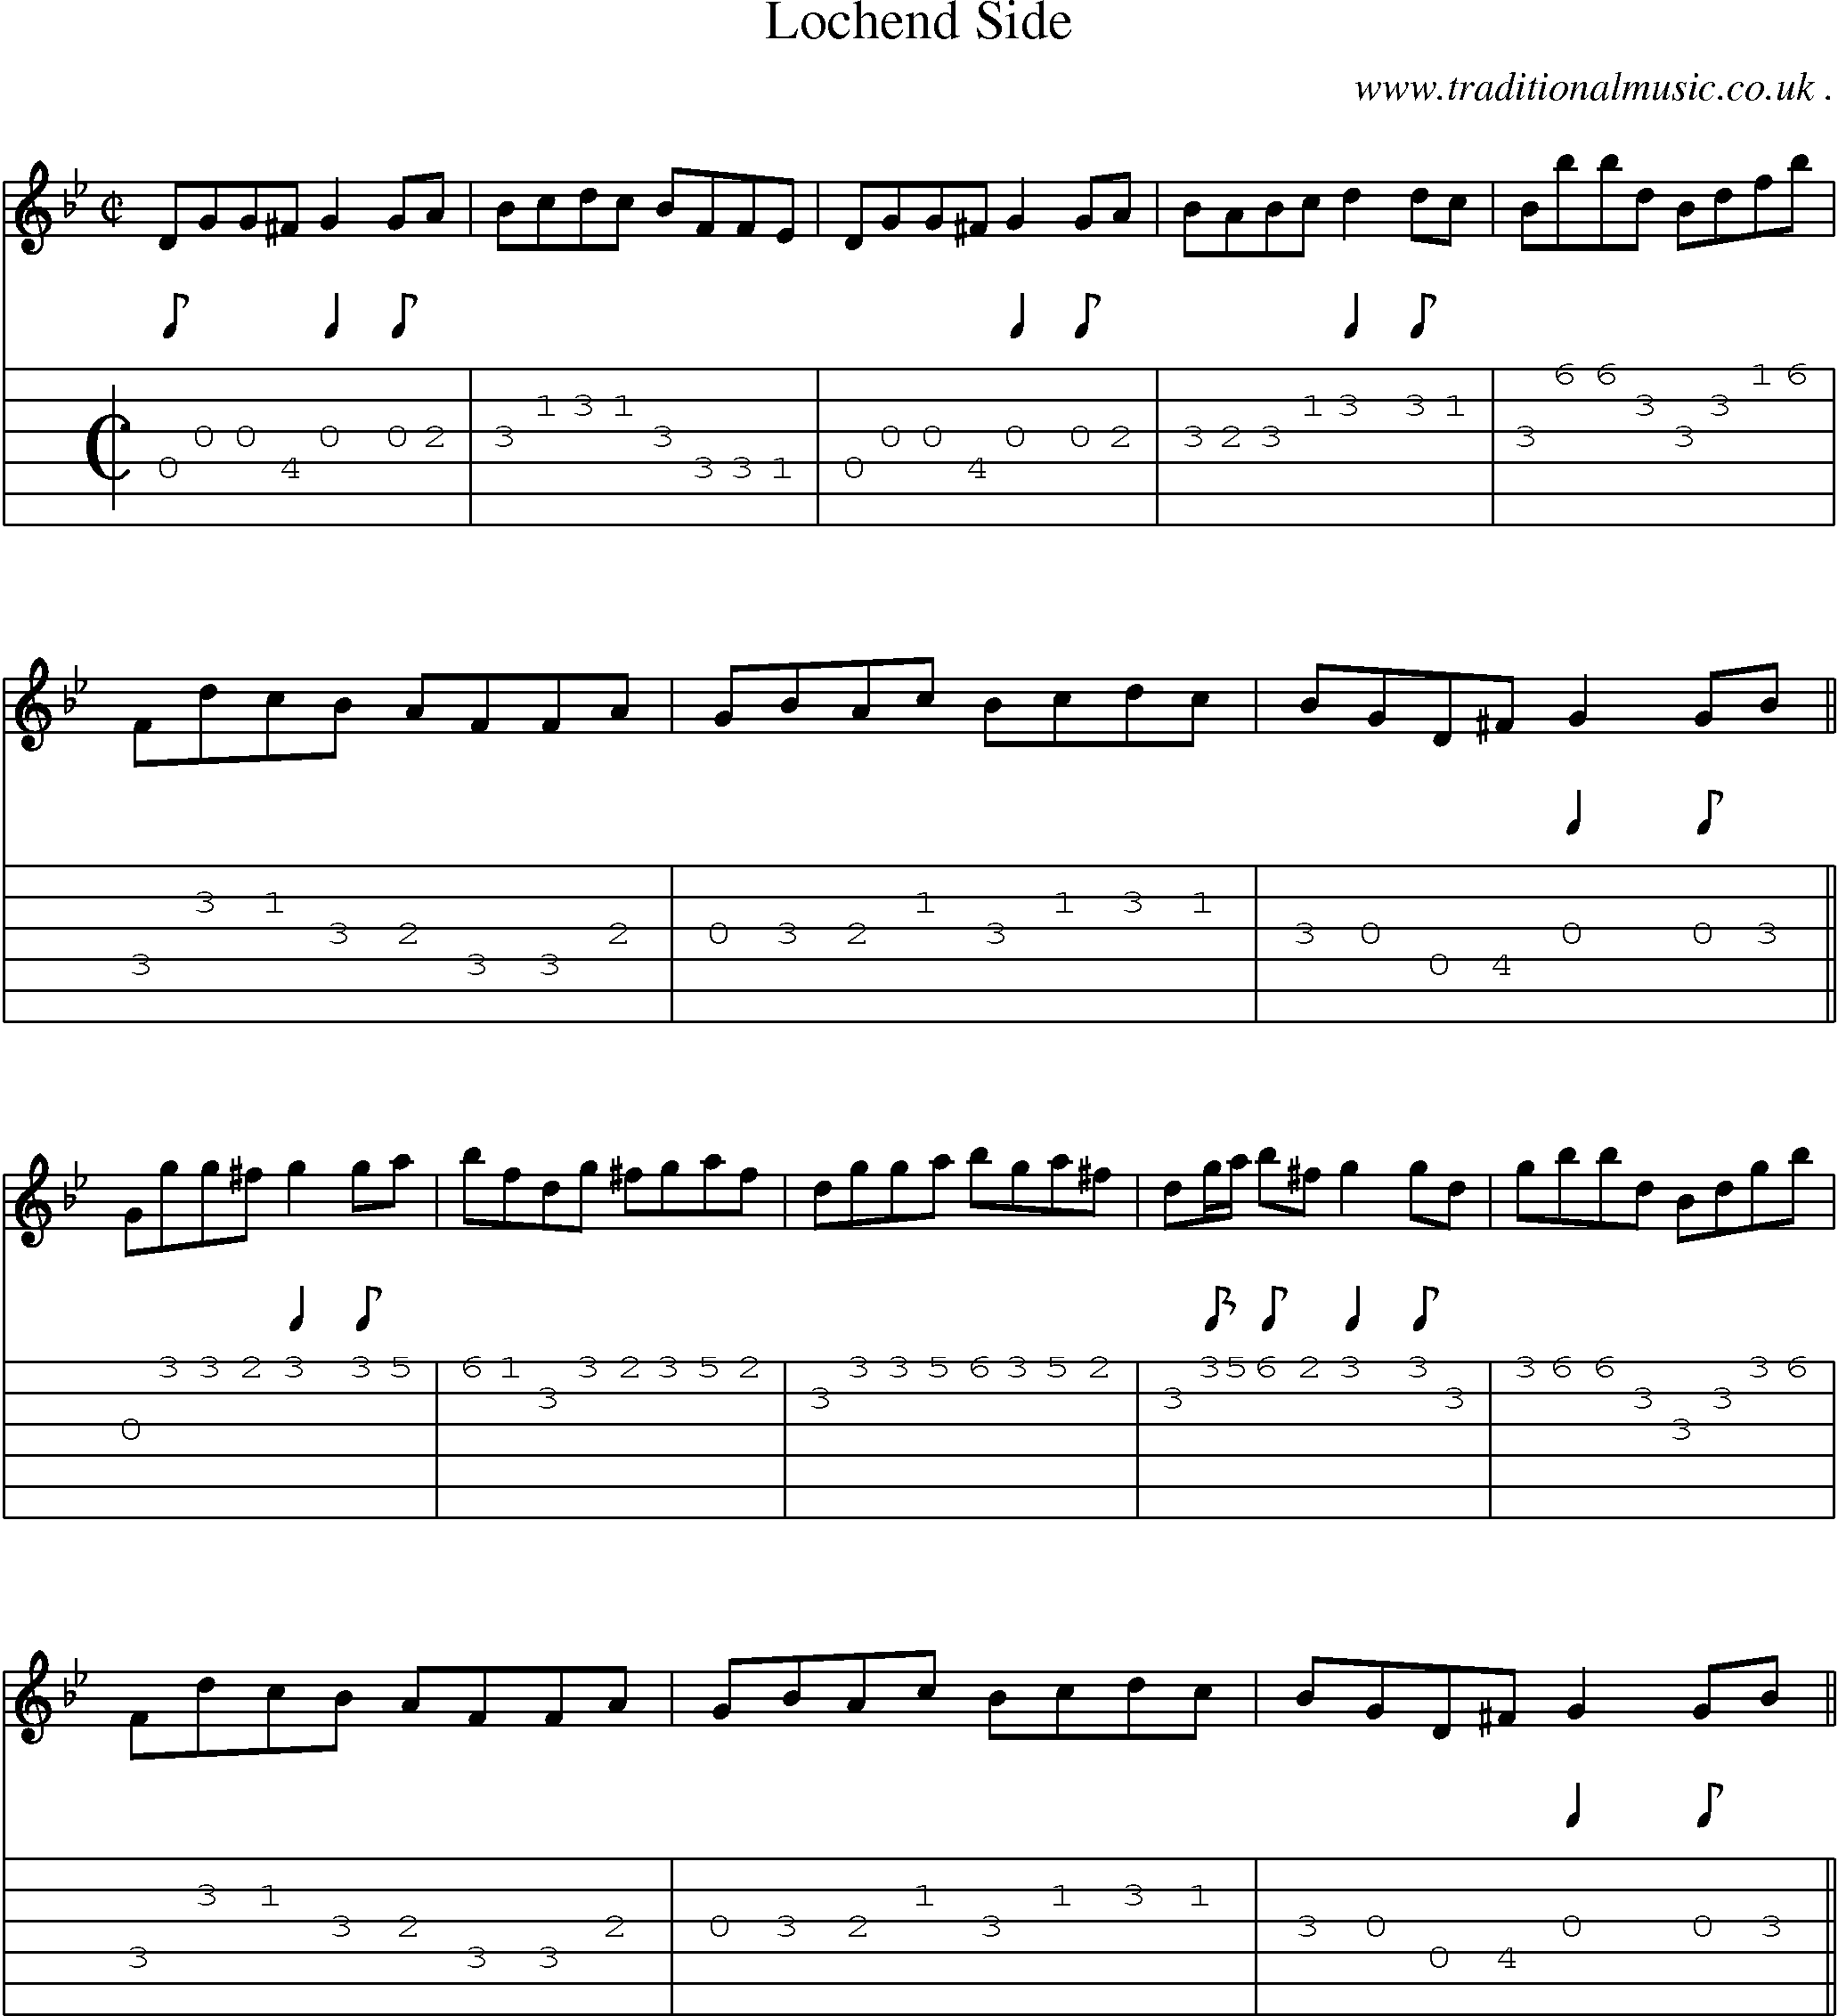 Sheet-music  score, Chords and Guitar Tabs for Lochend Side